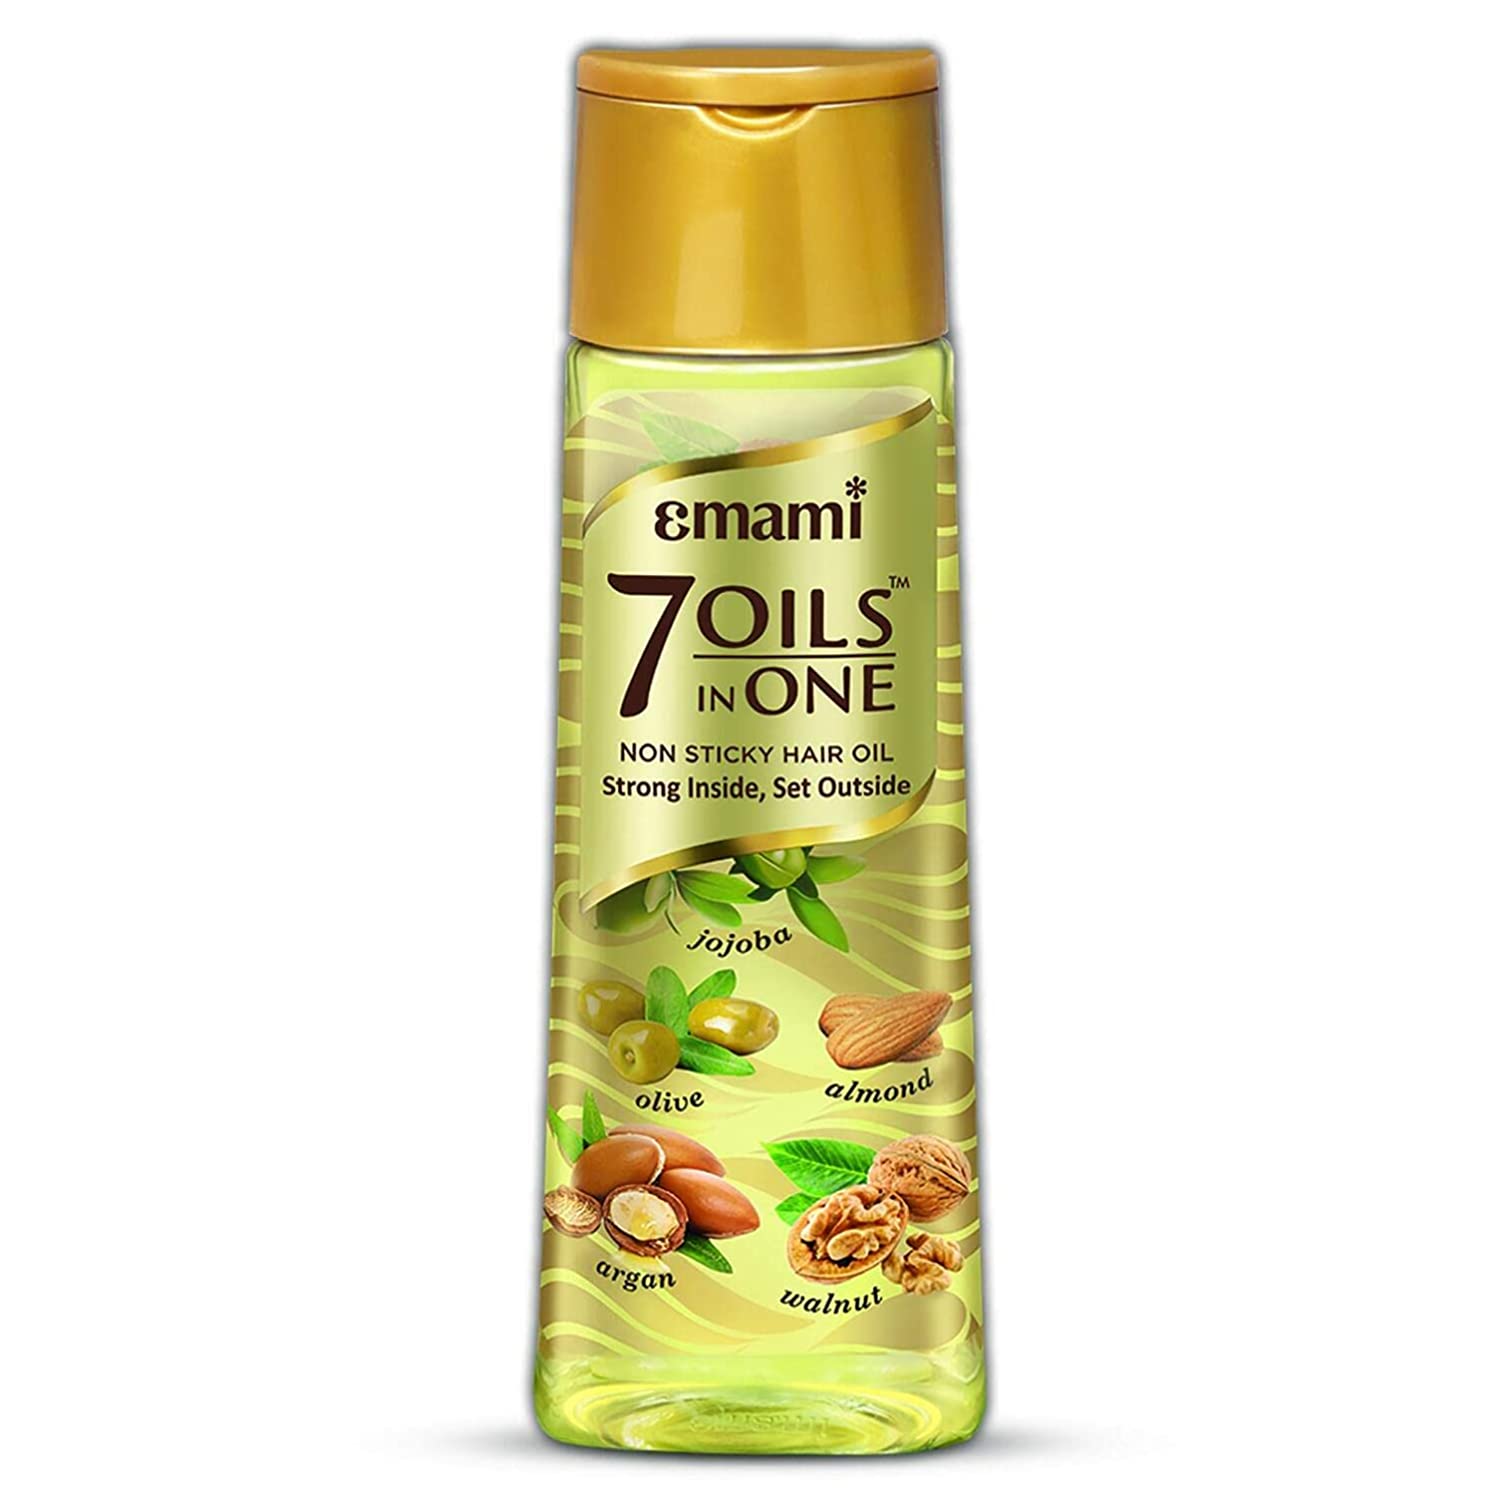 Emami 7 Oils In One, Non Sticky & Non Greasy Hair Oil with Goodness of Almond Oil, Coconut Oil, Argan Oil and Amla Oil - 300ml